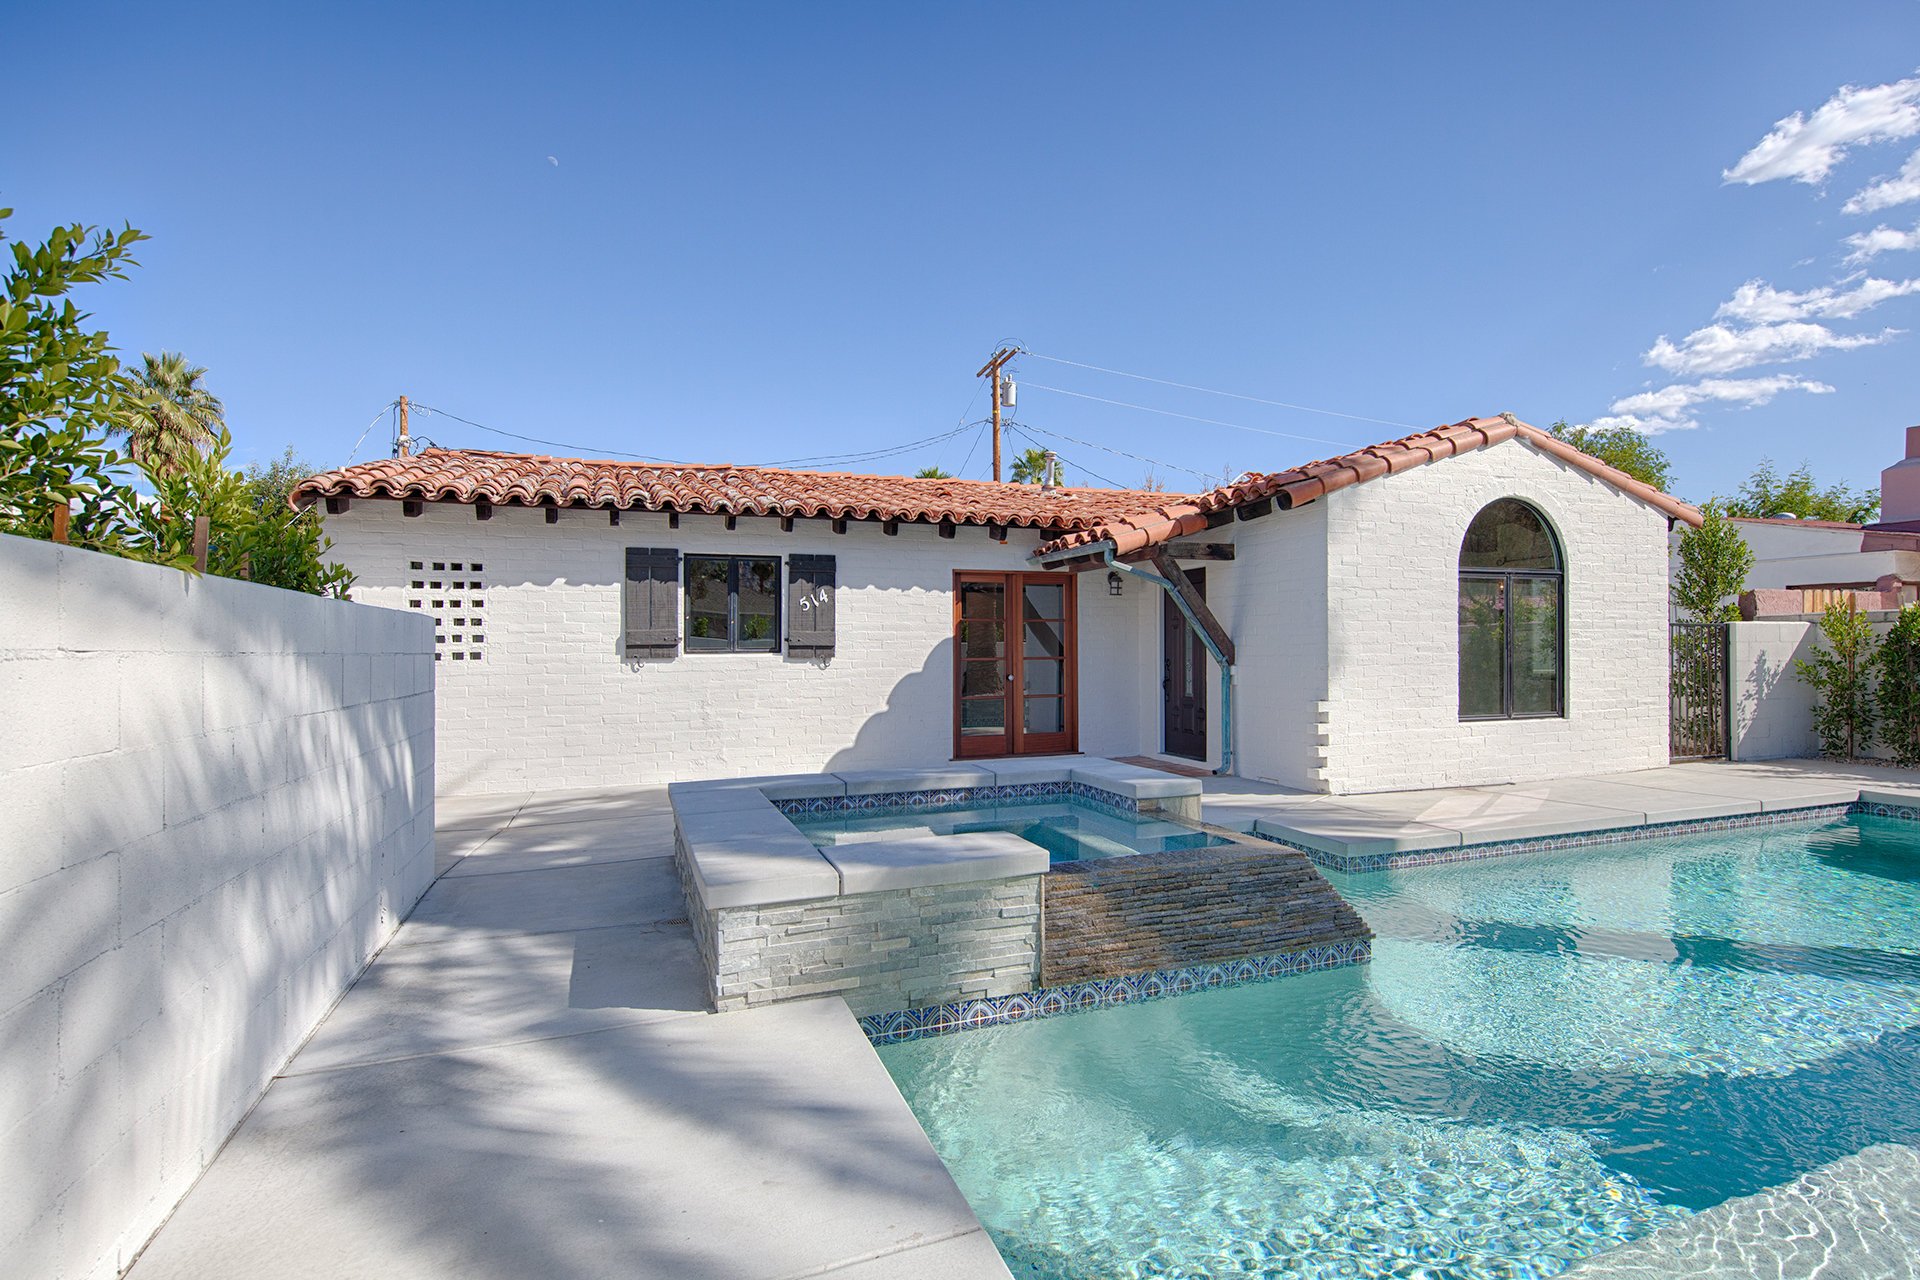 A Spanish home in the Warm Sands neighborhood of Palm Springs, California